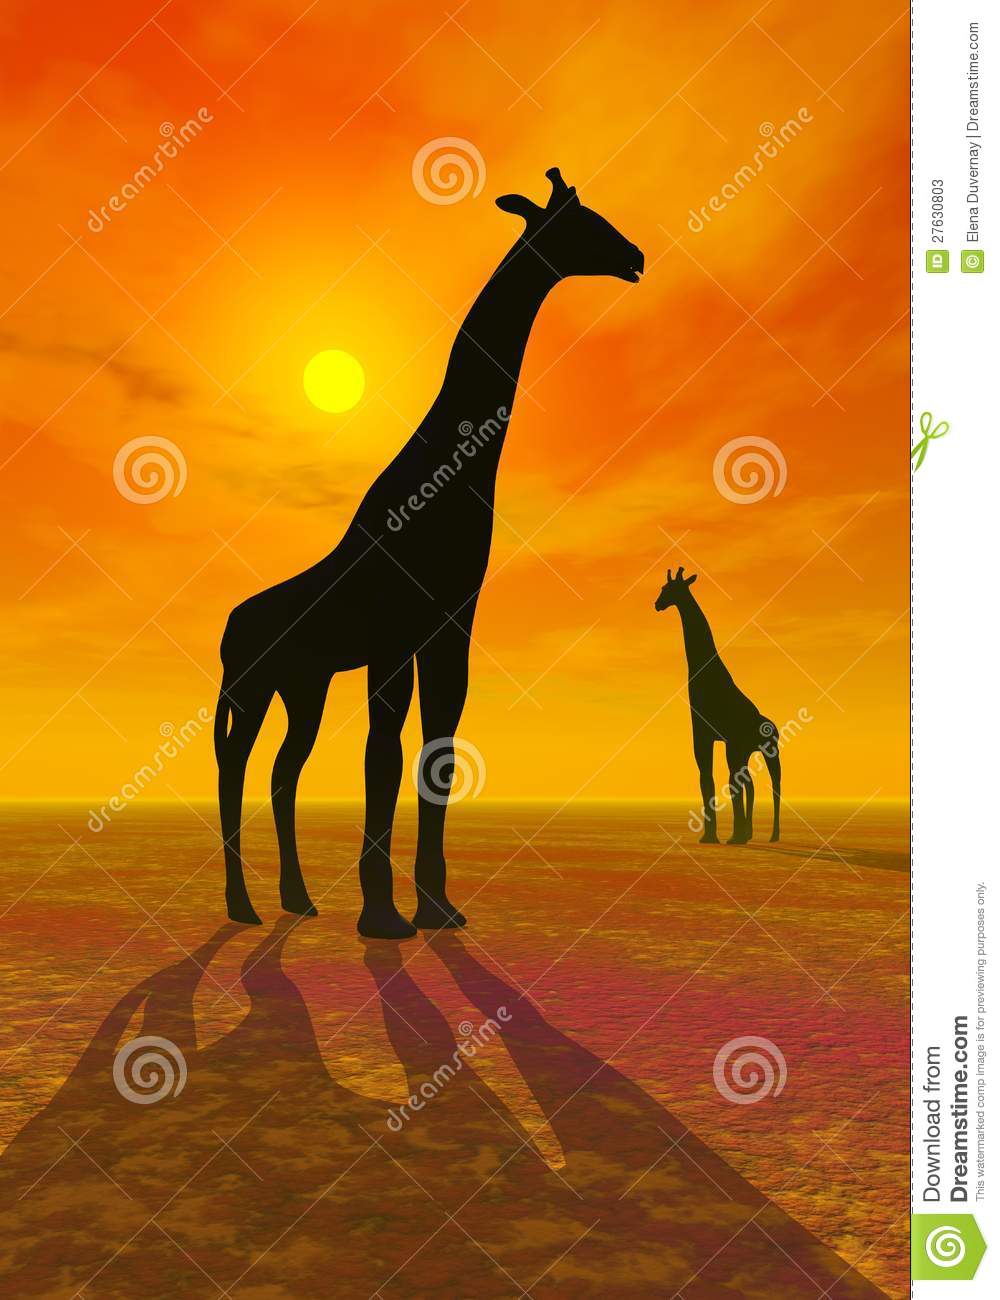 Shadows Of Two Giraffes By Beautiful Red Sunset In The Desert